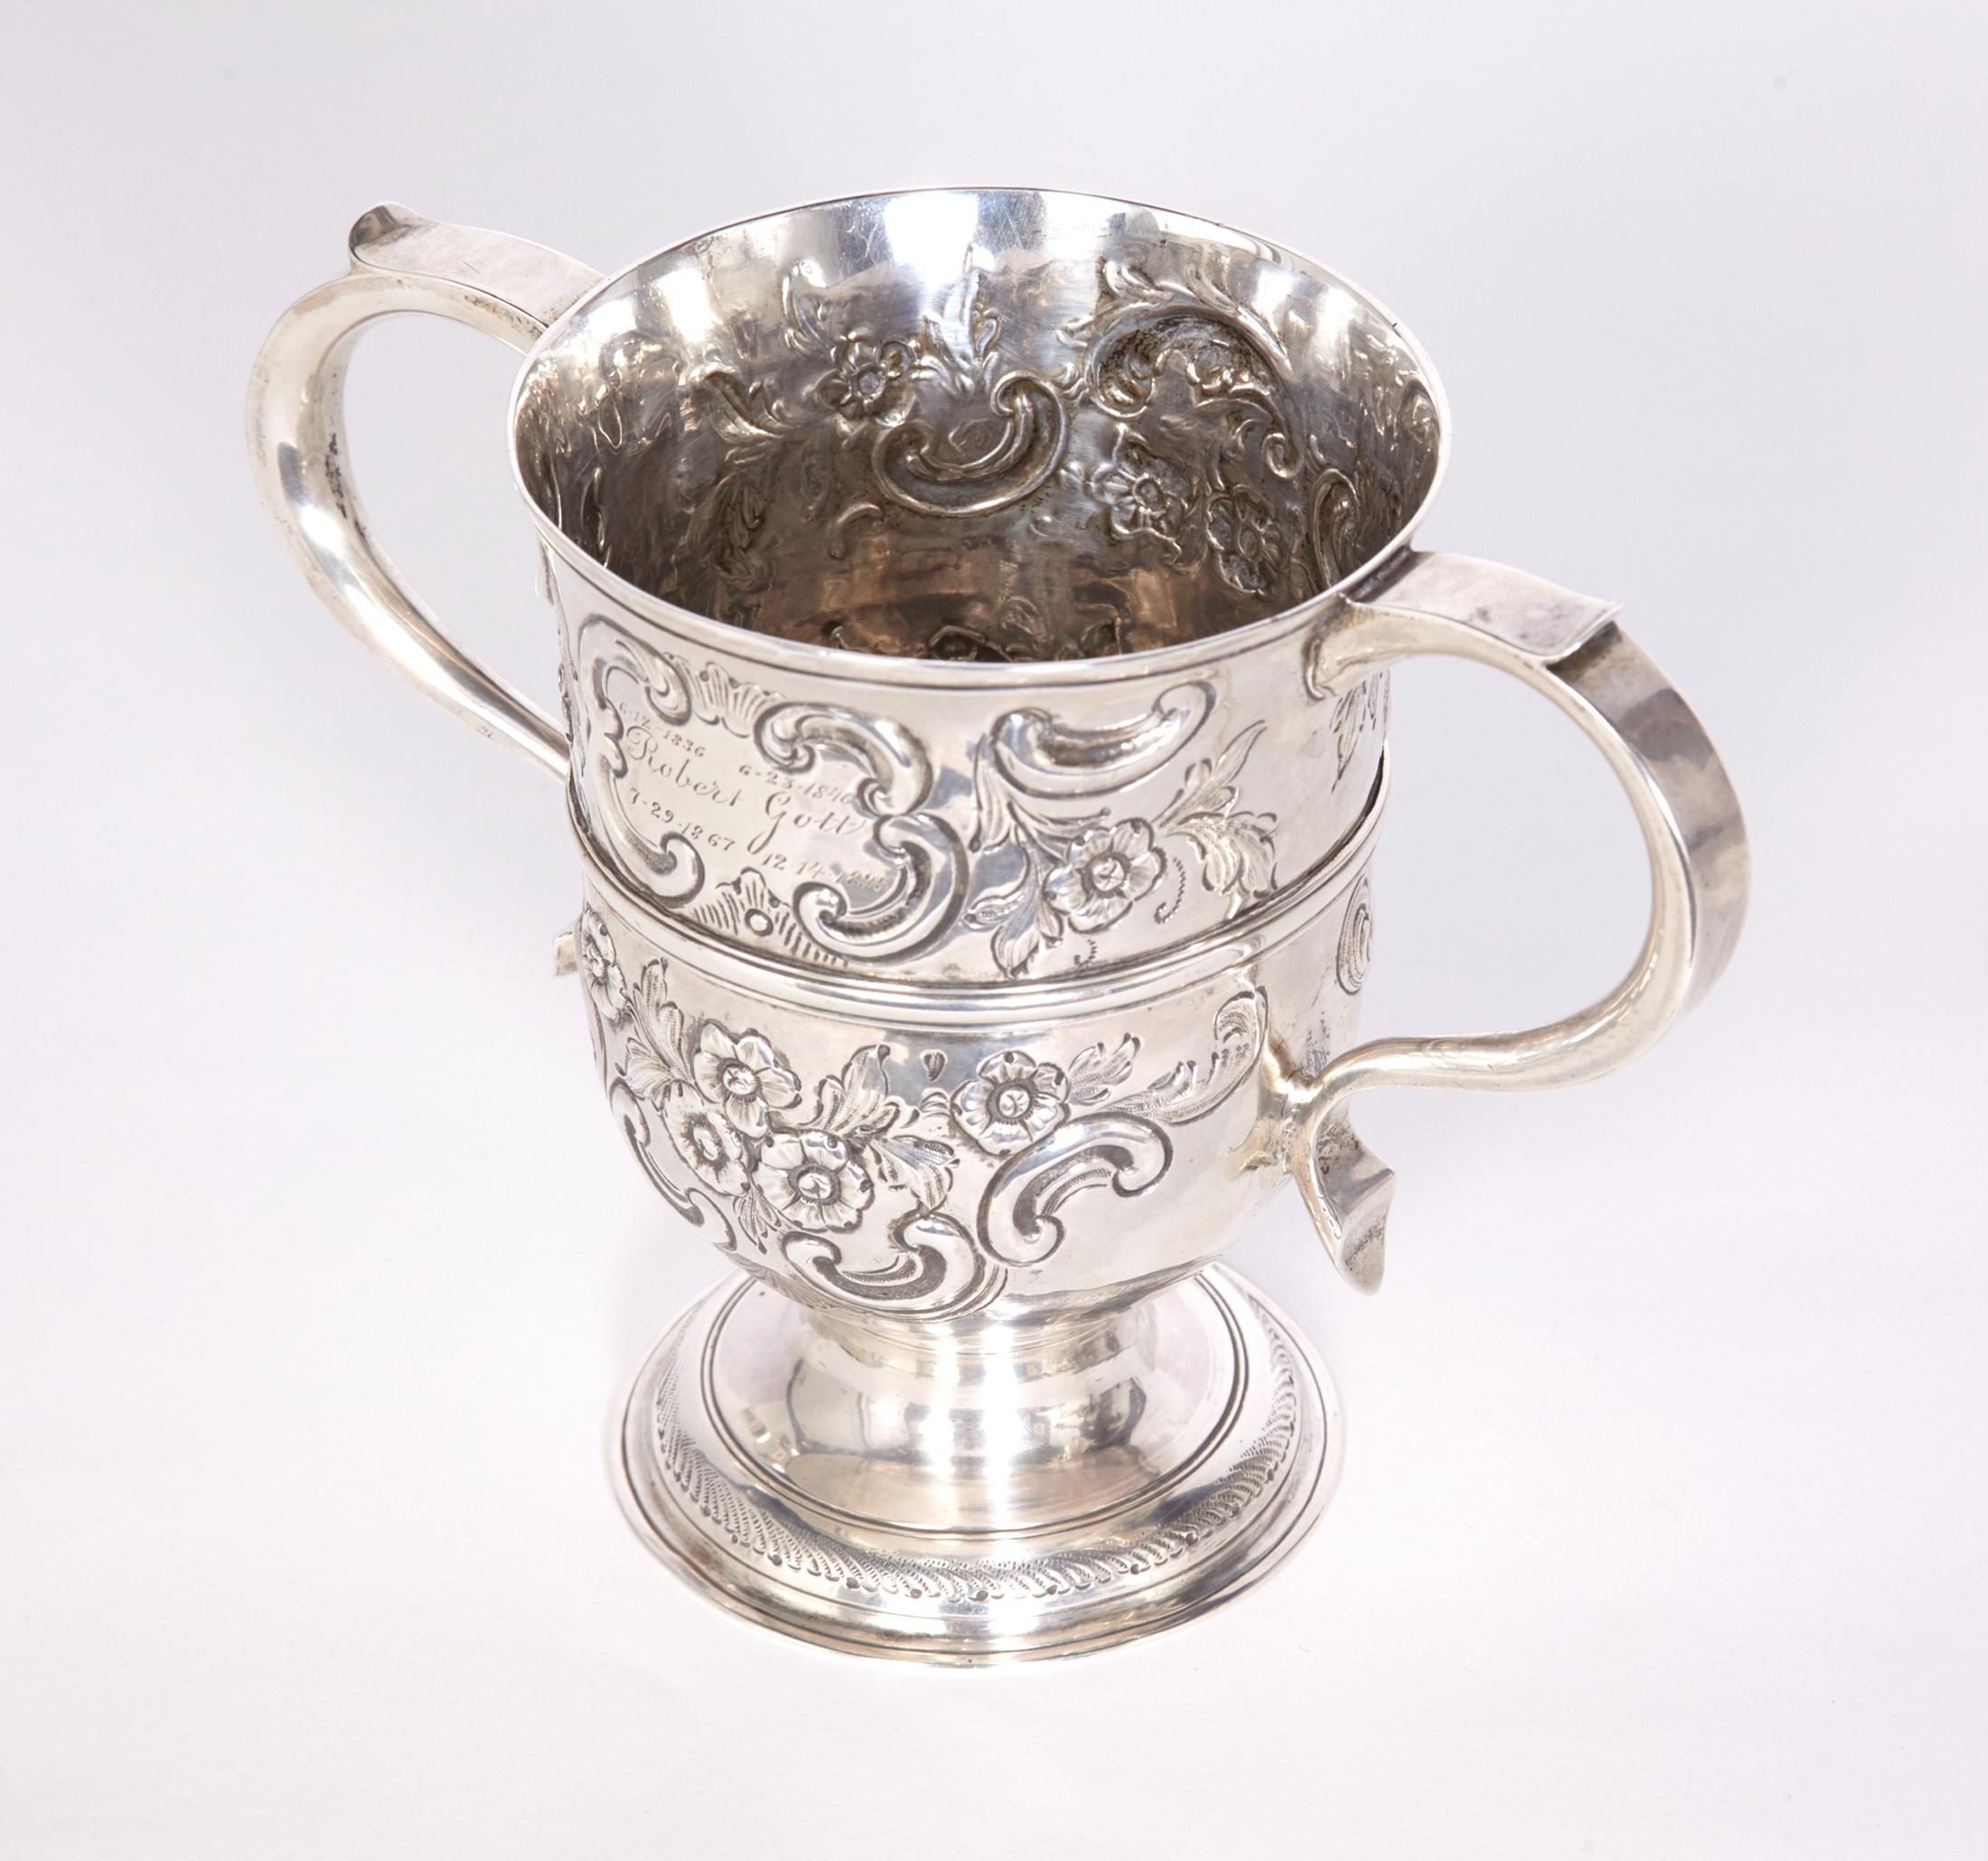 English Sterling Silver 2-Handled Loving Cup 1762, London by Thomas Whipham